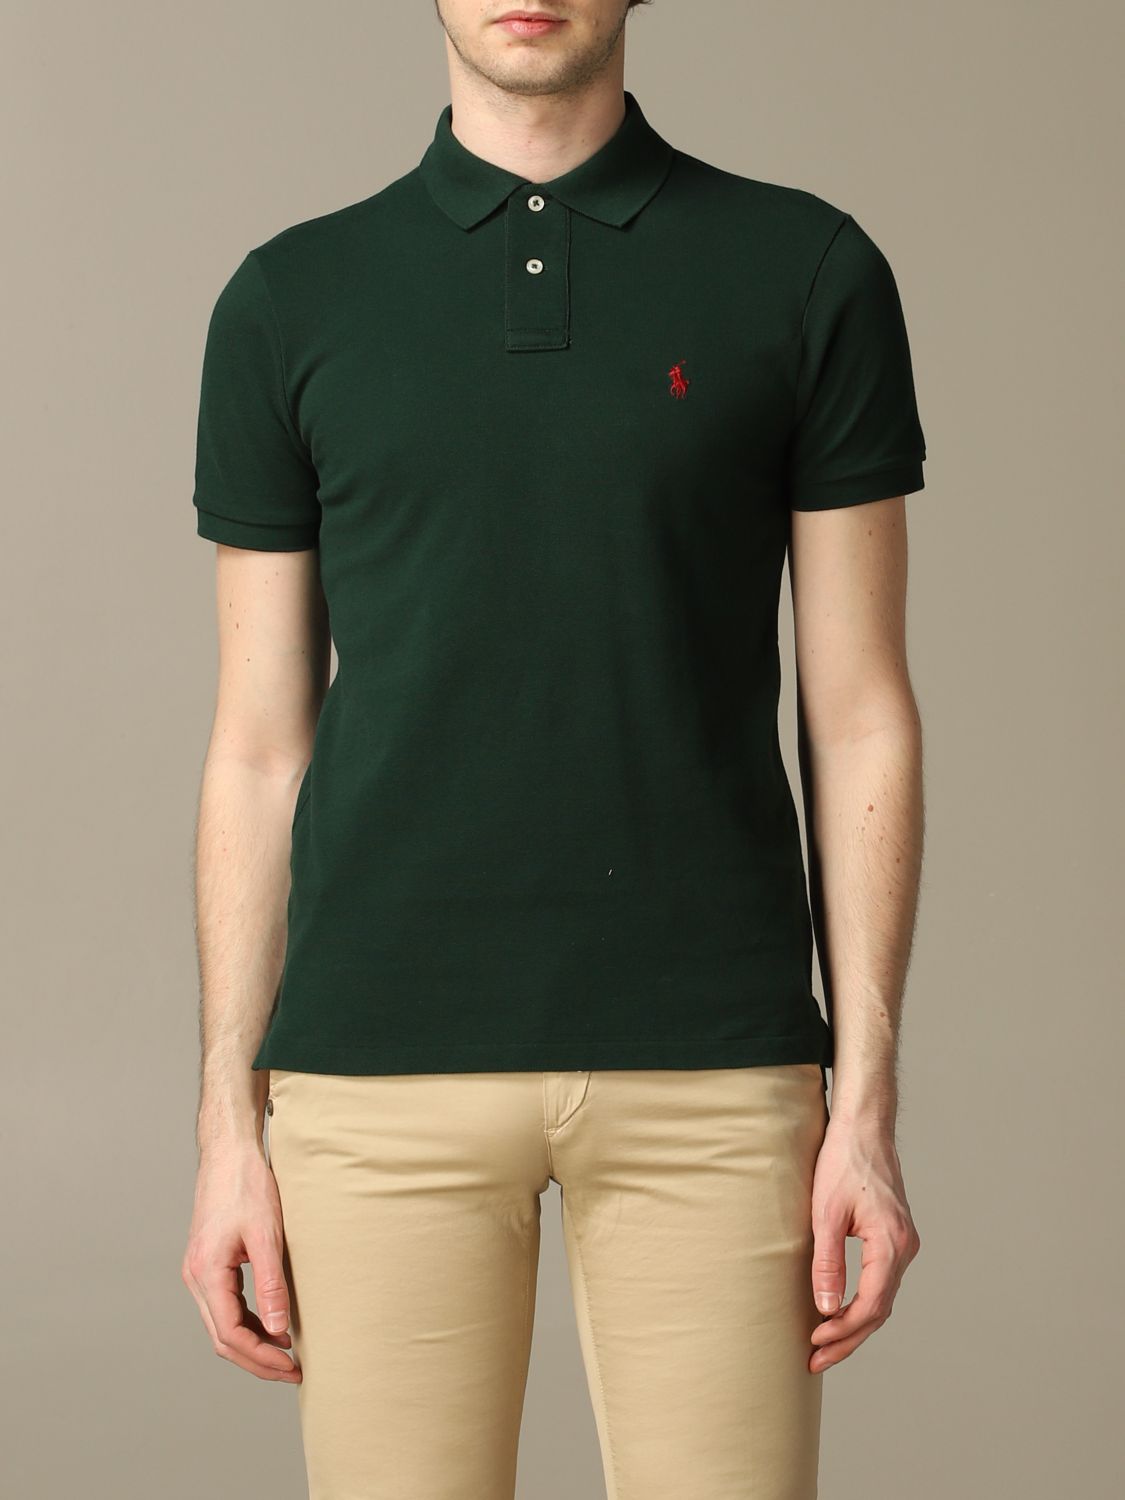 POLO RALPH LAUREN: polo shirt in honeycomb cotton - Forest Green | Polo  Ralph Lauren polo shirt 710795080 online on 